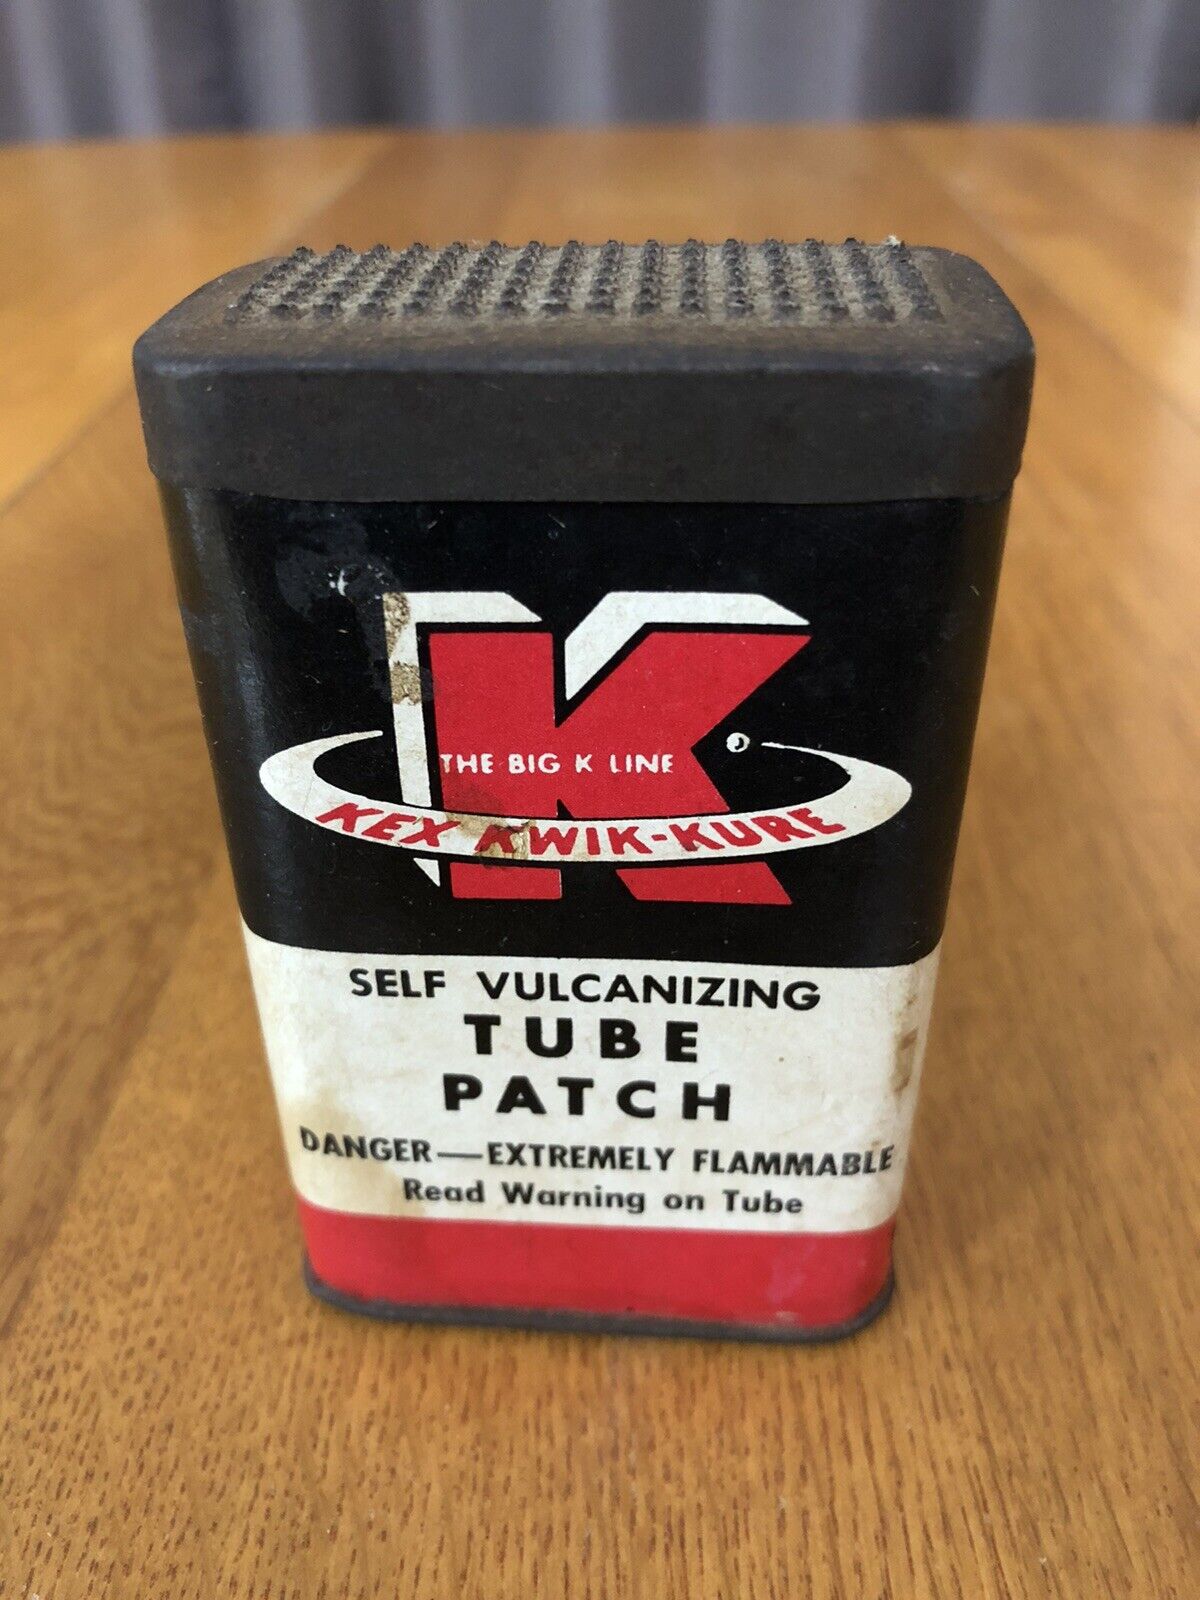 Vintage Kex Kwik-Kure Tube Patch Tin Container With Parts St Louis MO